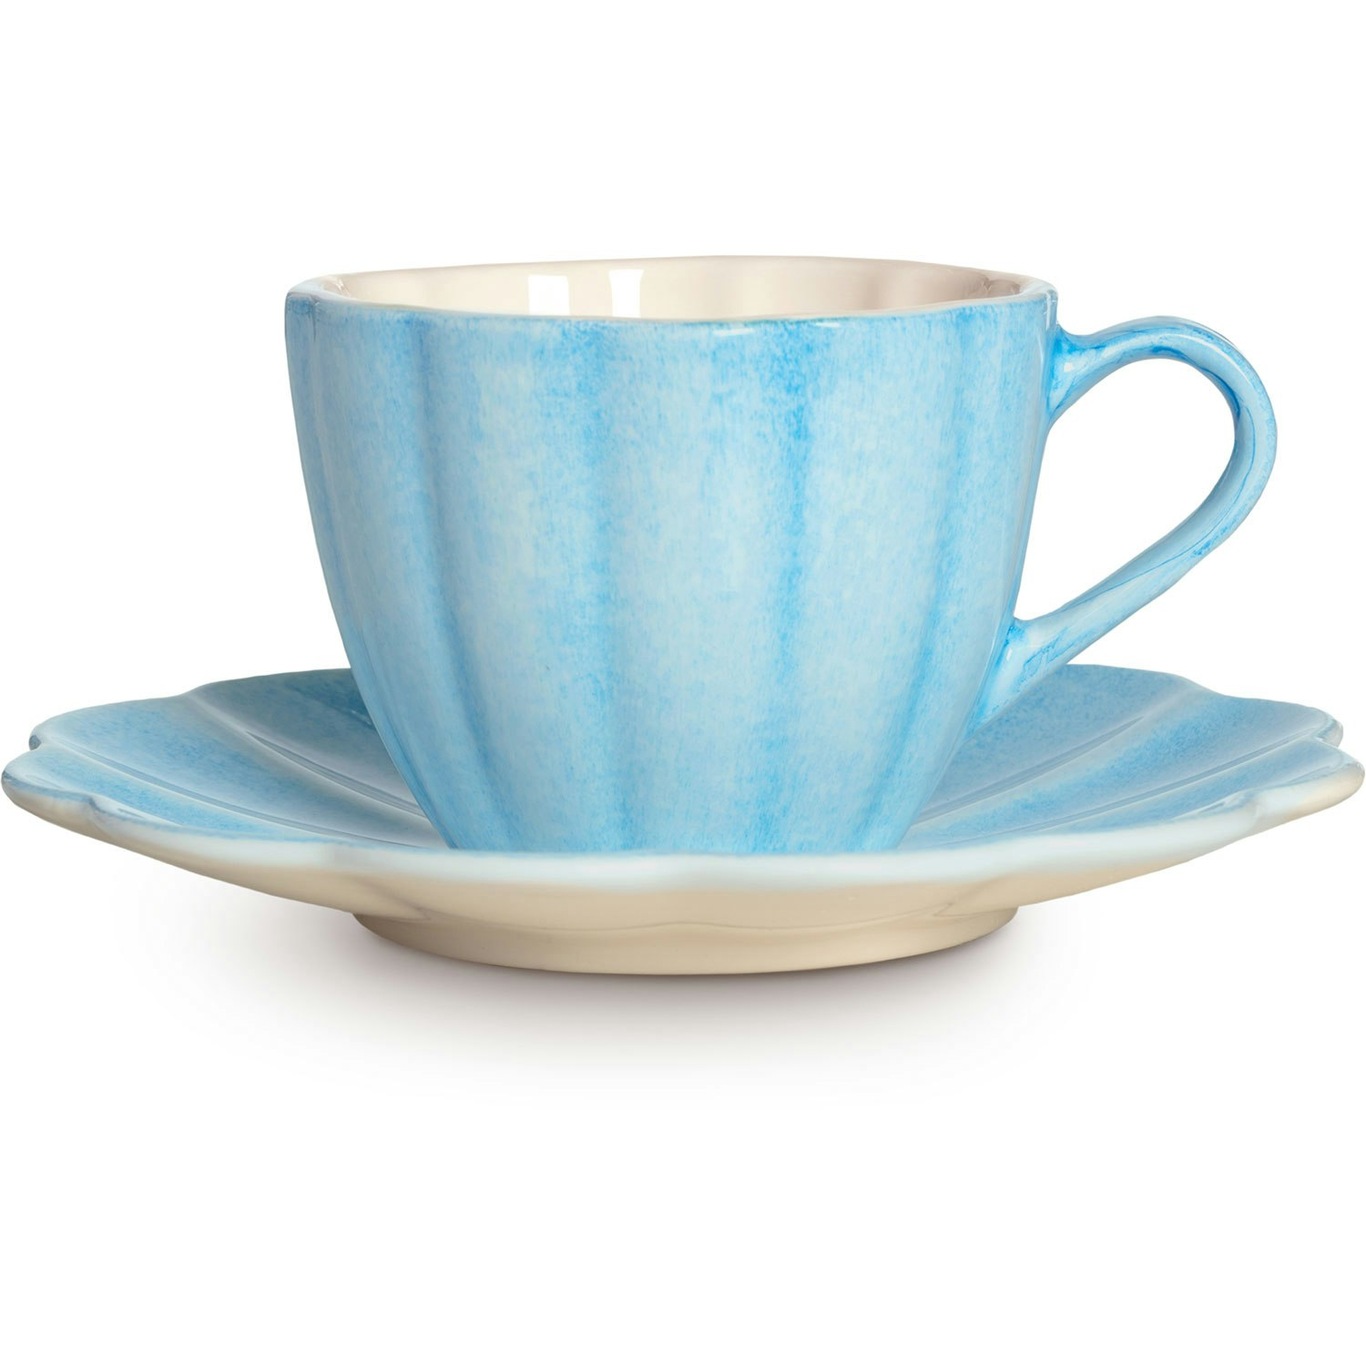 Oyster Cup With Saucer 25 cl, Turquoise